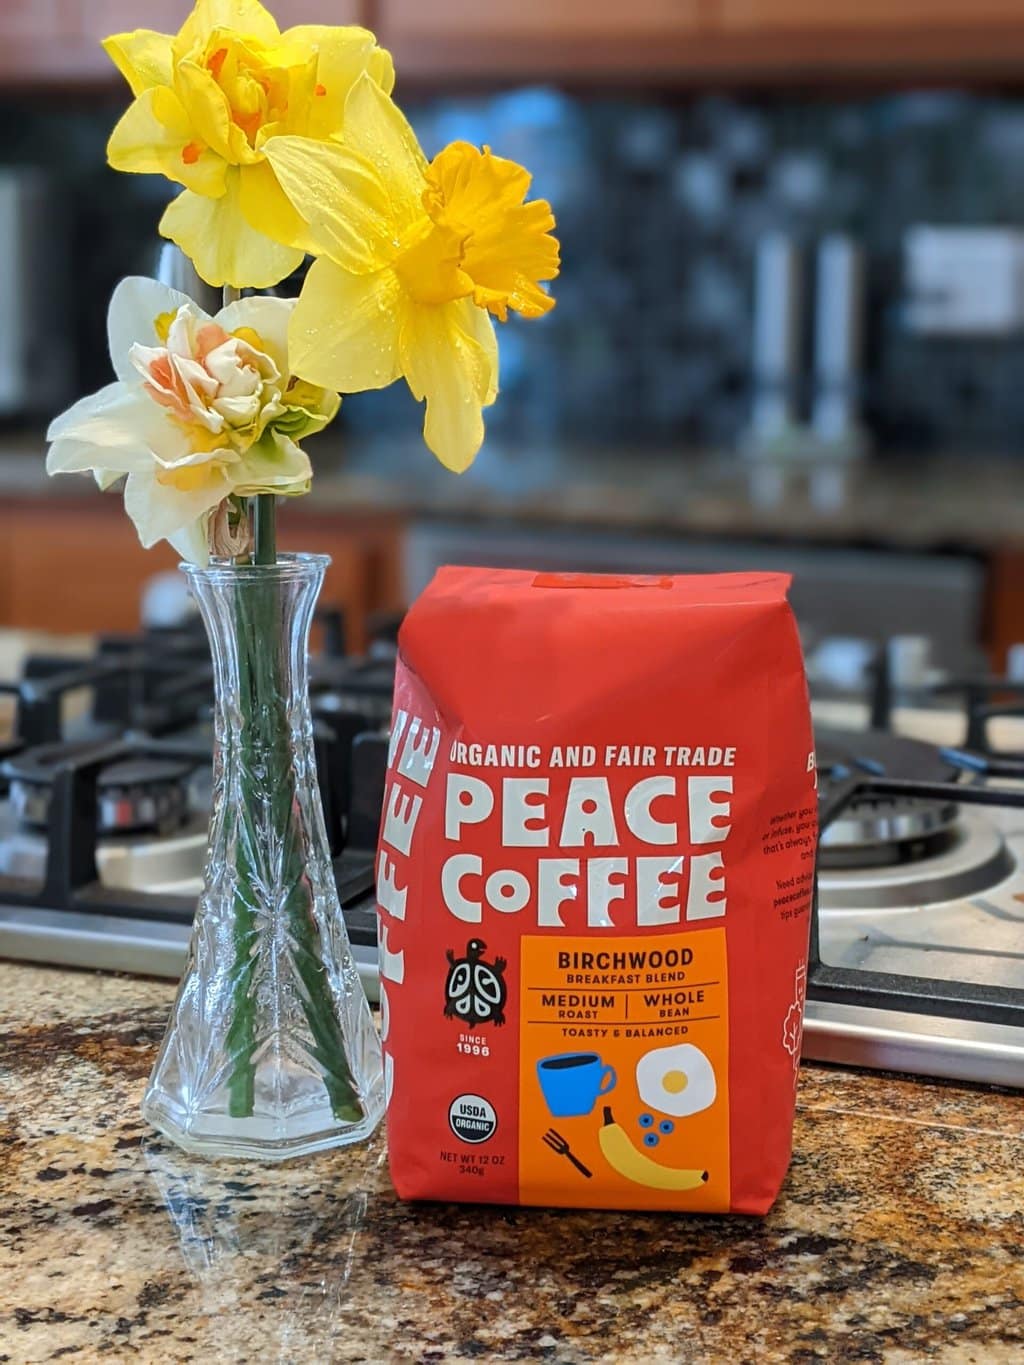 On the kitchen table, next to a vase with daffodils, there is a package of Peace Coffee Birchwood Breakfast Blend Medium Roast.